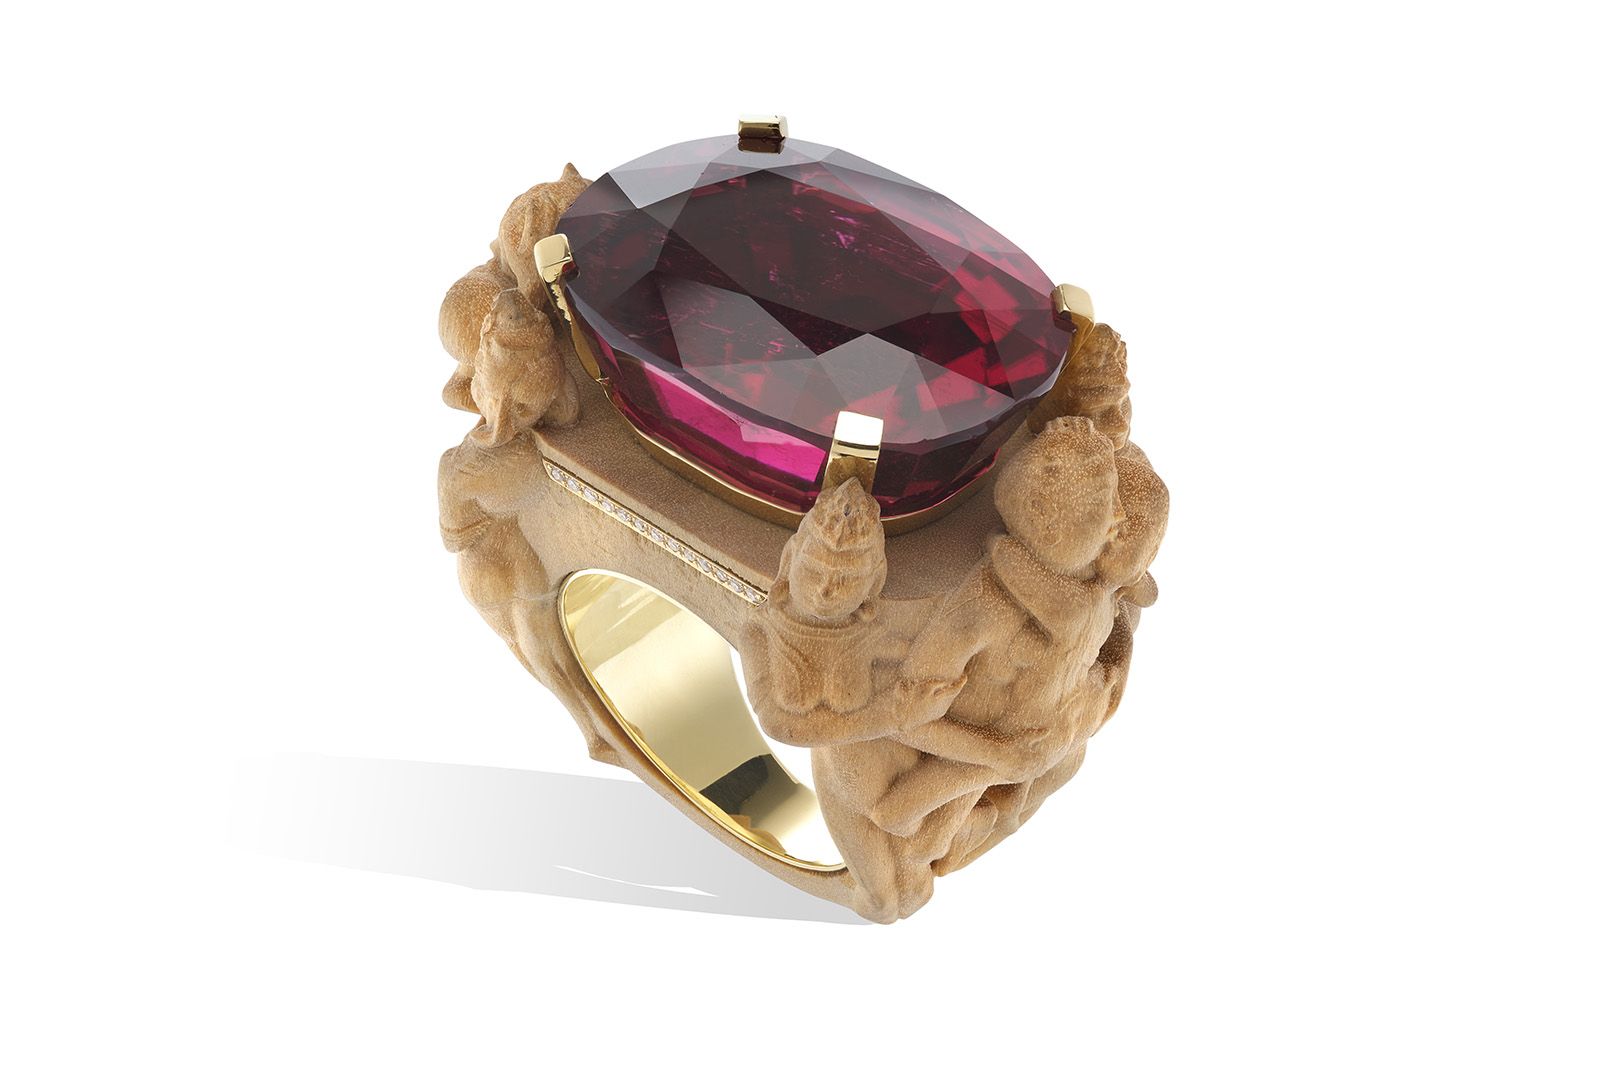 Lydia Courteille Khajuraho Temple-inspired sandalwood ring with a 25 carat rubellite tourmaline from the Indian Song High Jewellery collection 